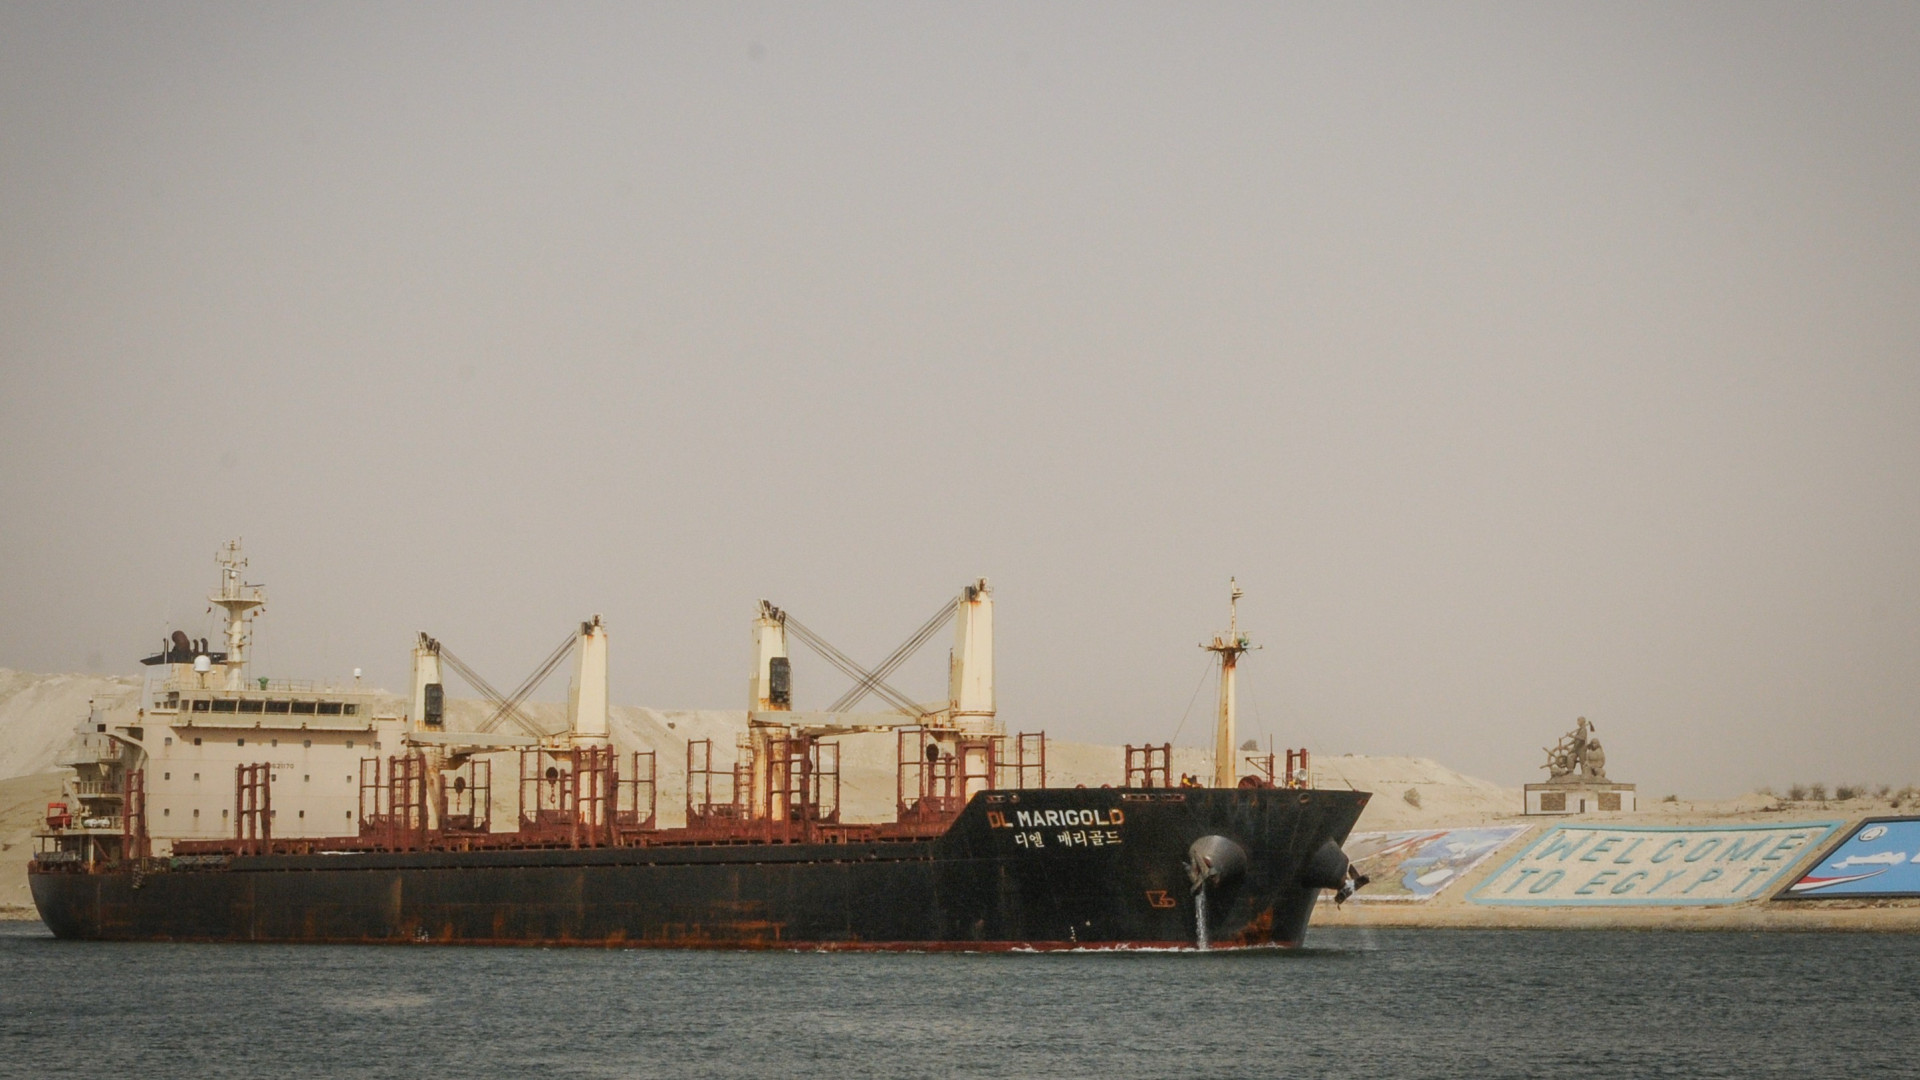 The crisis of container ships in the Suez Canal - was much worse